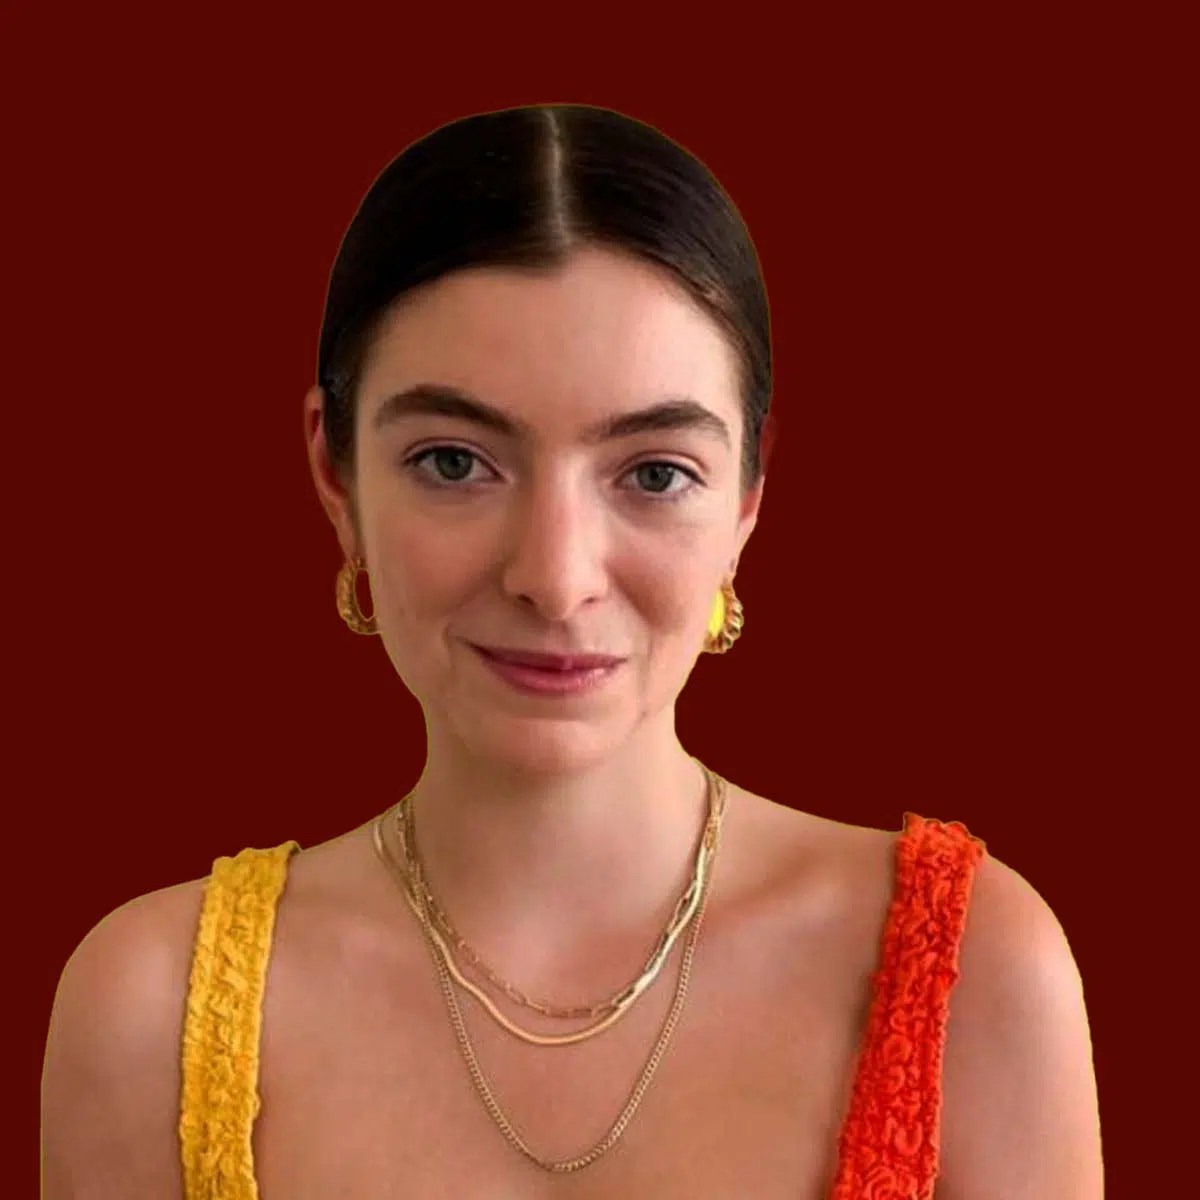 Lorde Age, Bio, Birthday, Family, Net Worth National Today